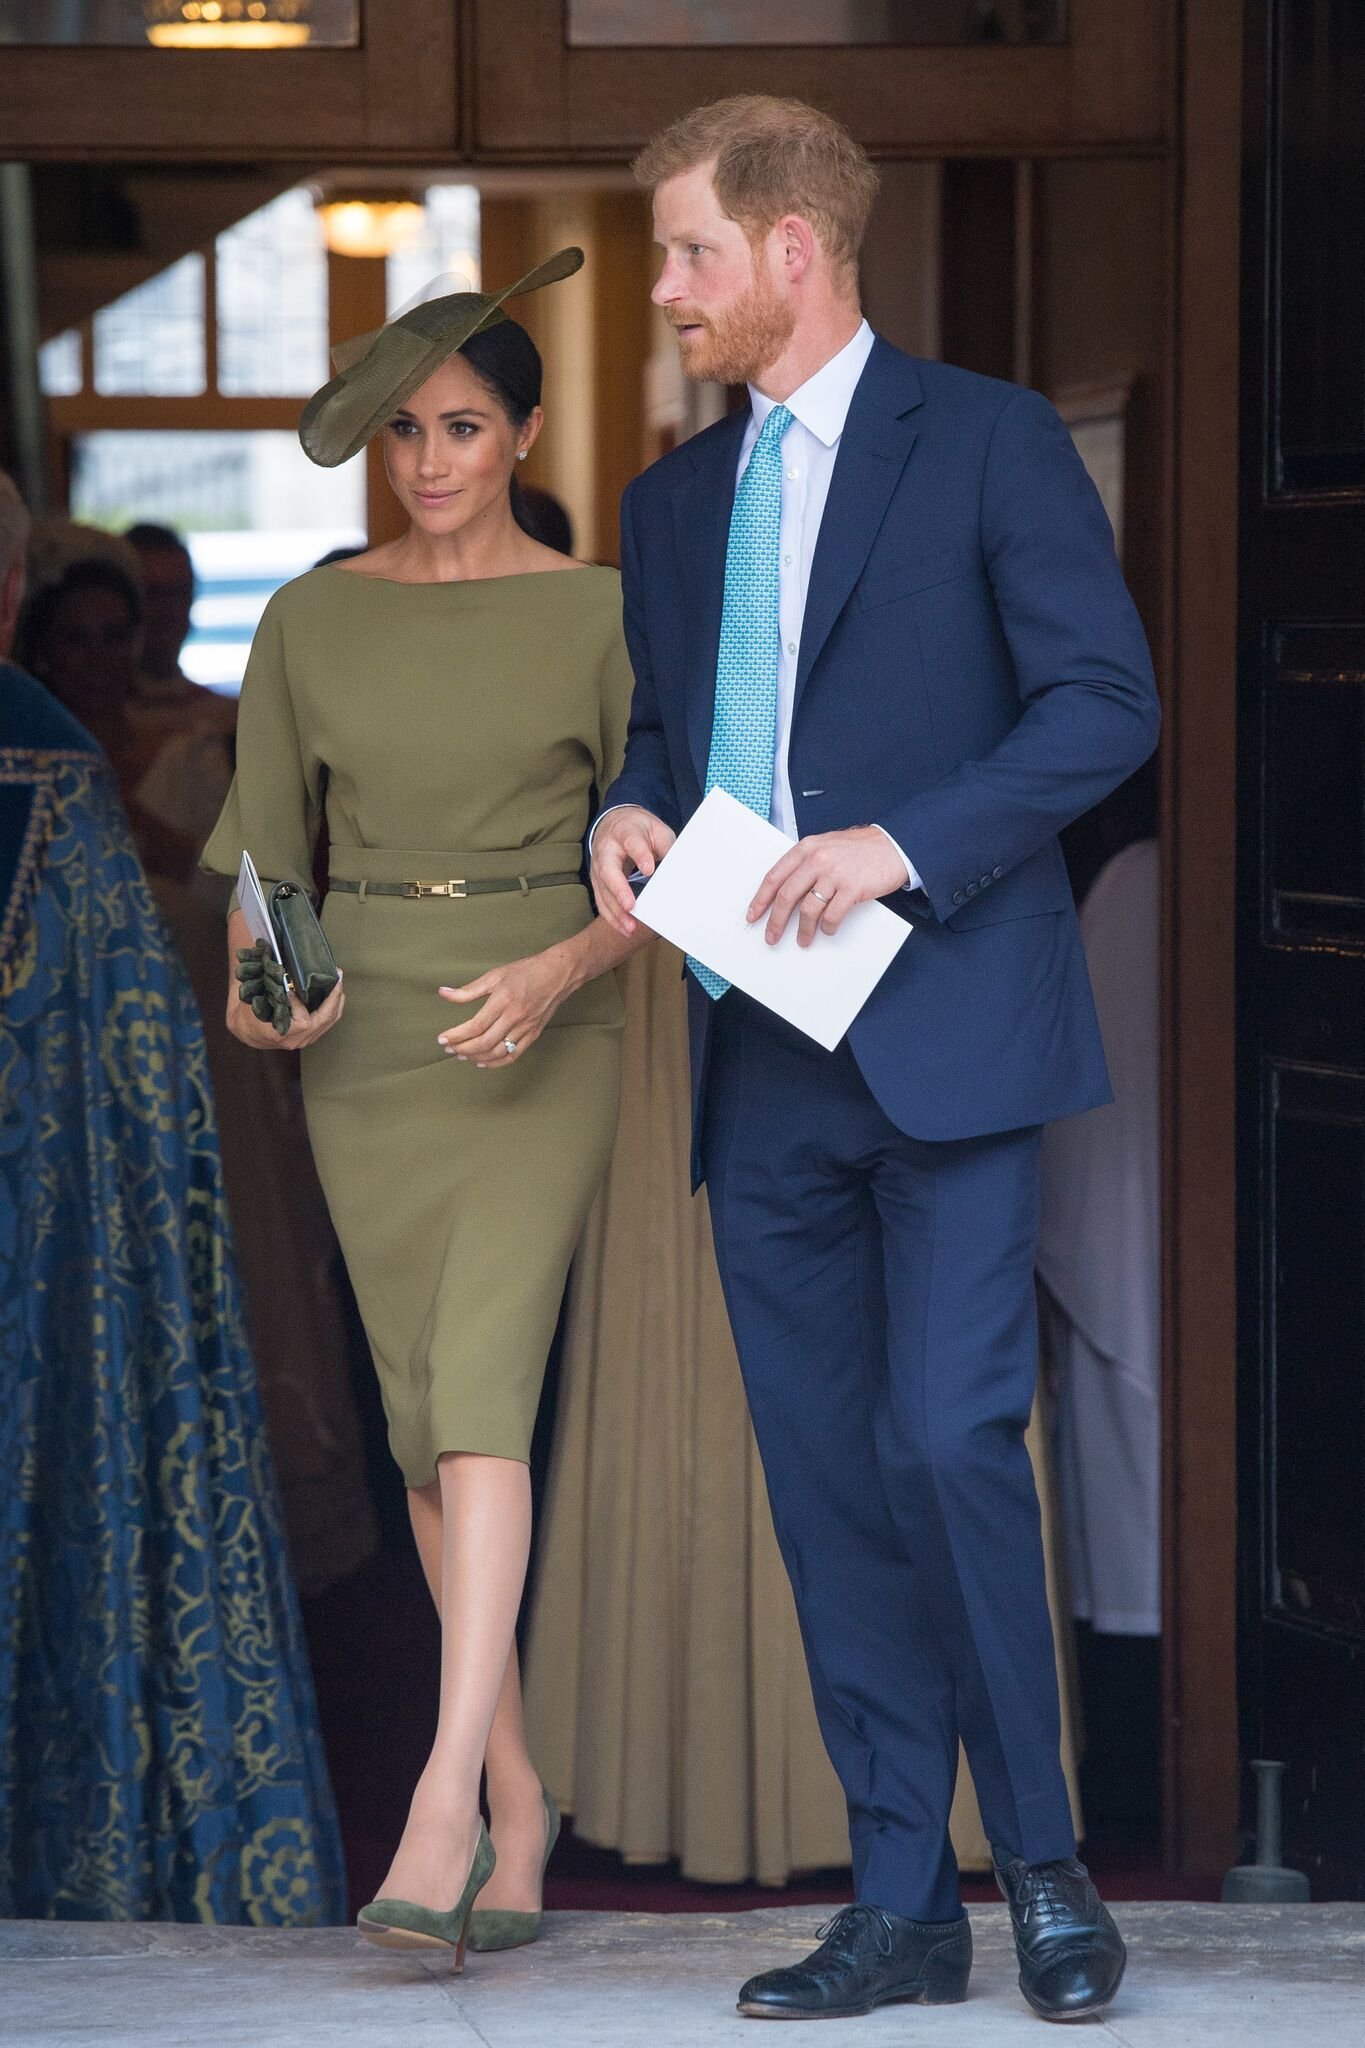 The Duke and Duchess of Sussex depart after attending the christening of Prince Louis at the Chapel Royal, St James's Palace  | Getty Images